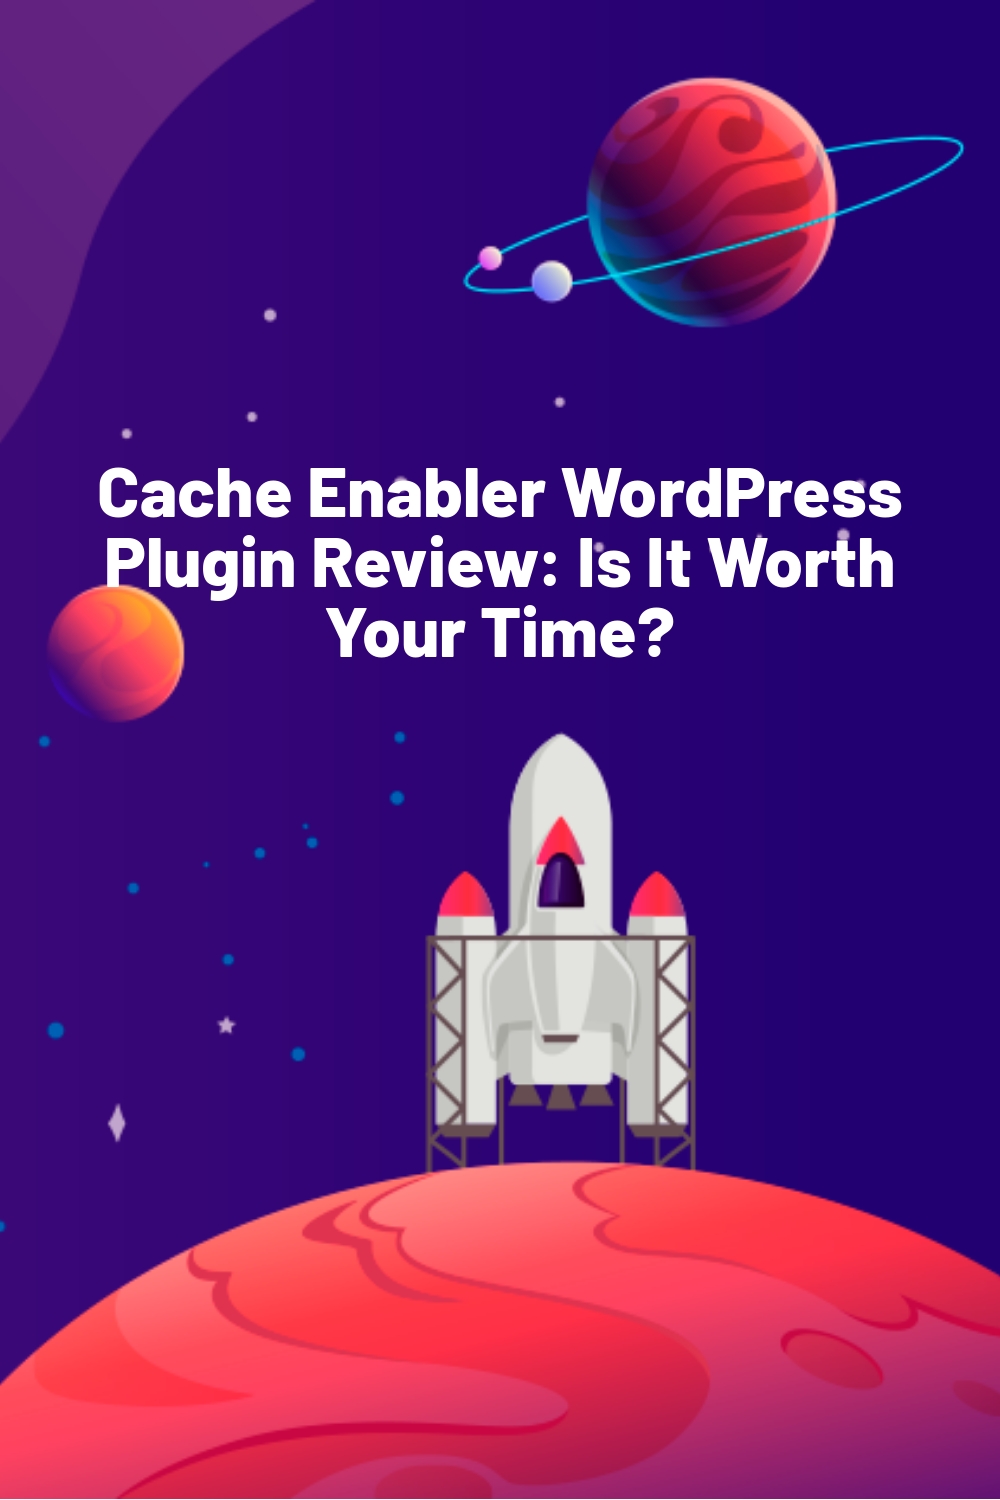 Cache Enabler WordPress Plugin Review: Is It Worth Your Time?